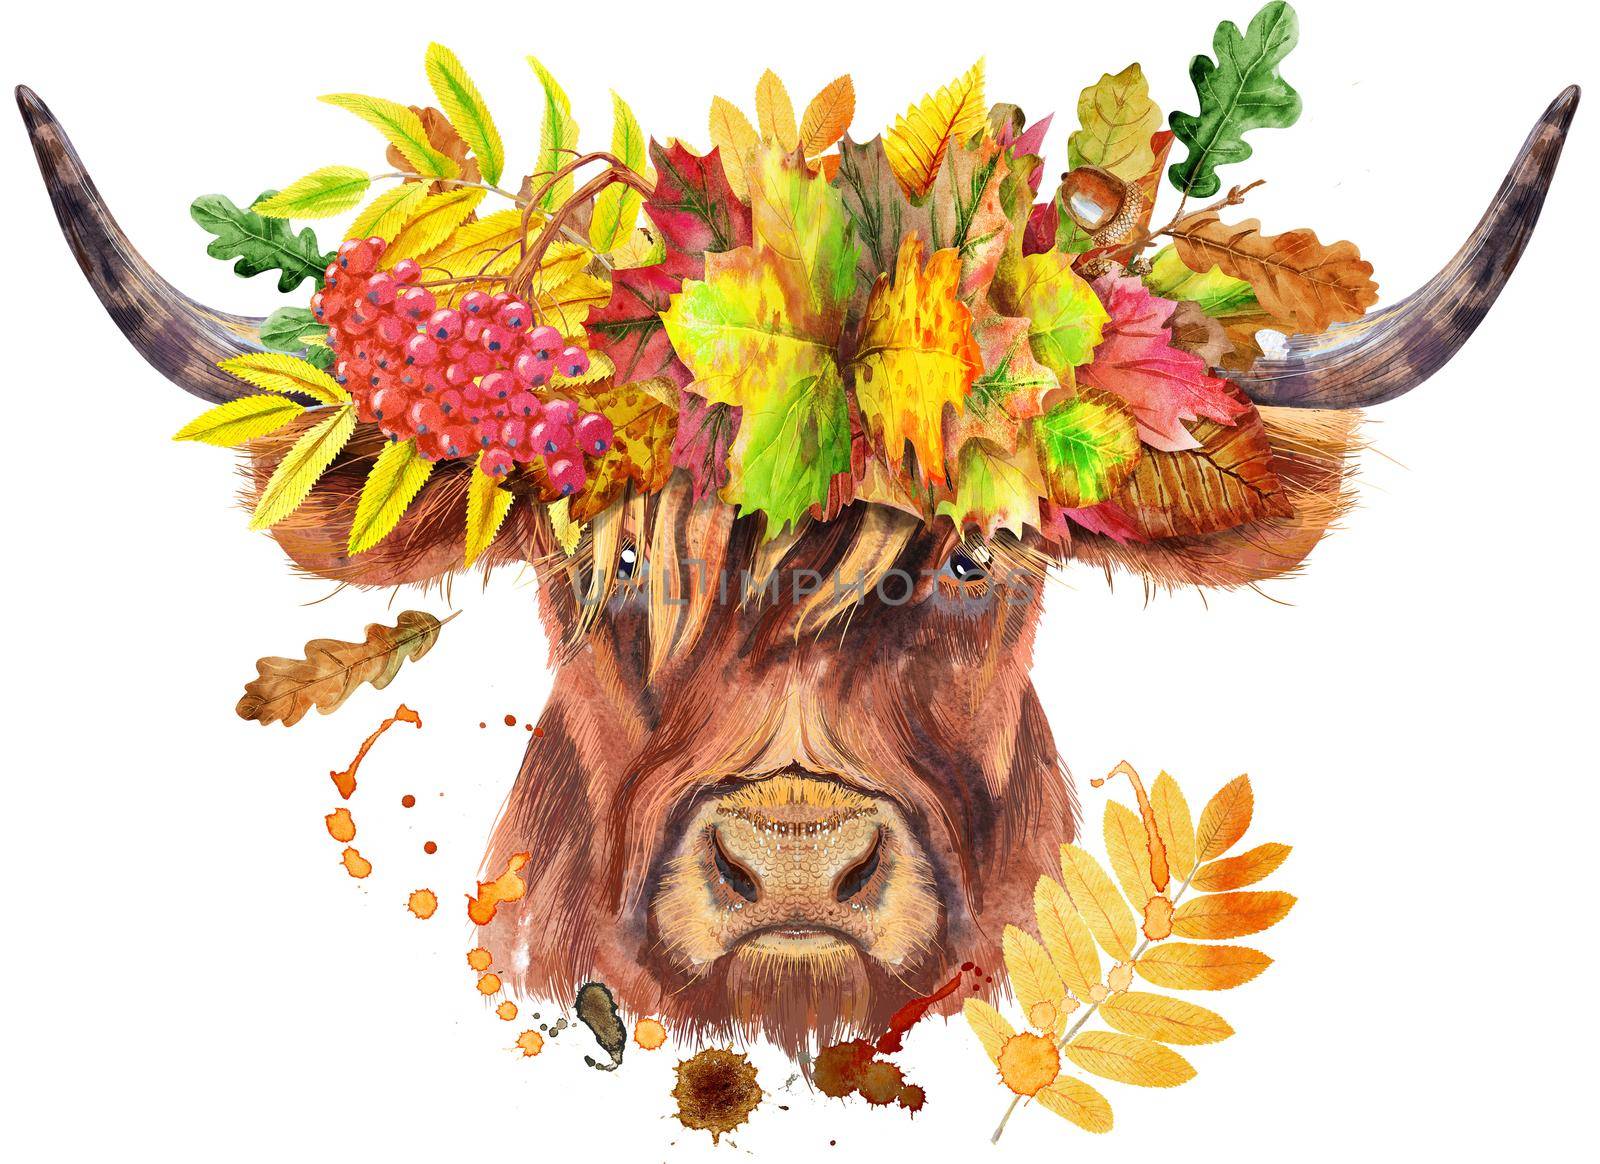 Watercolor illustration of a brown long-horned bull in a wreath of autumn leaves by NataOmsk